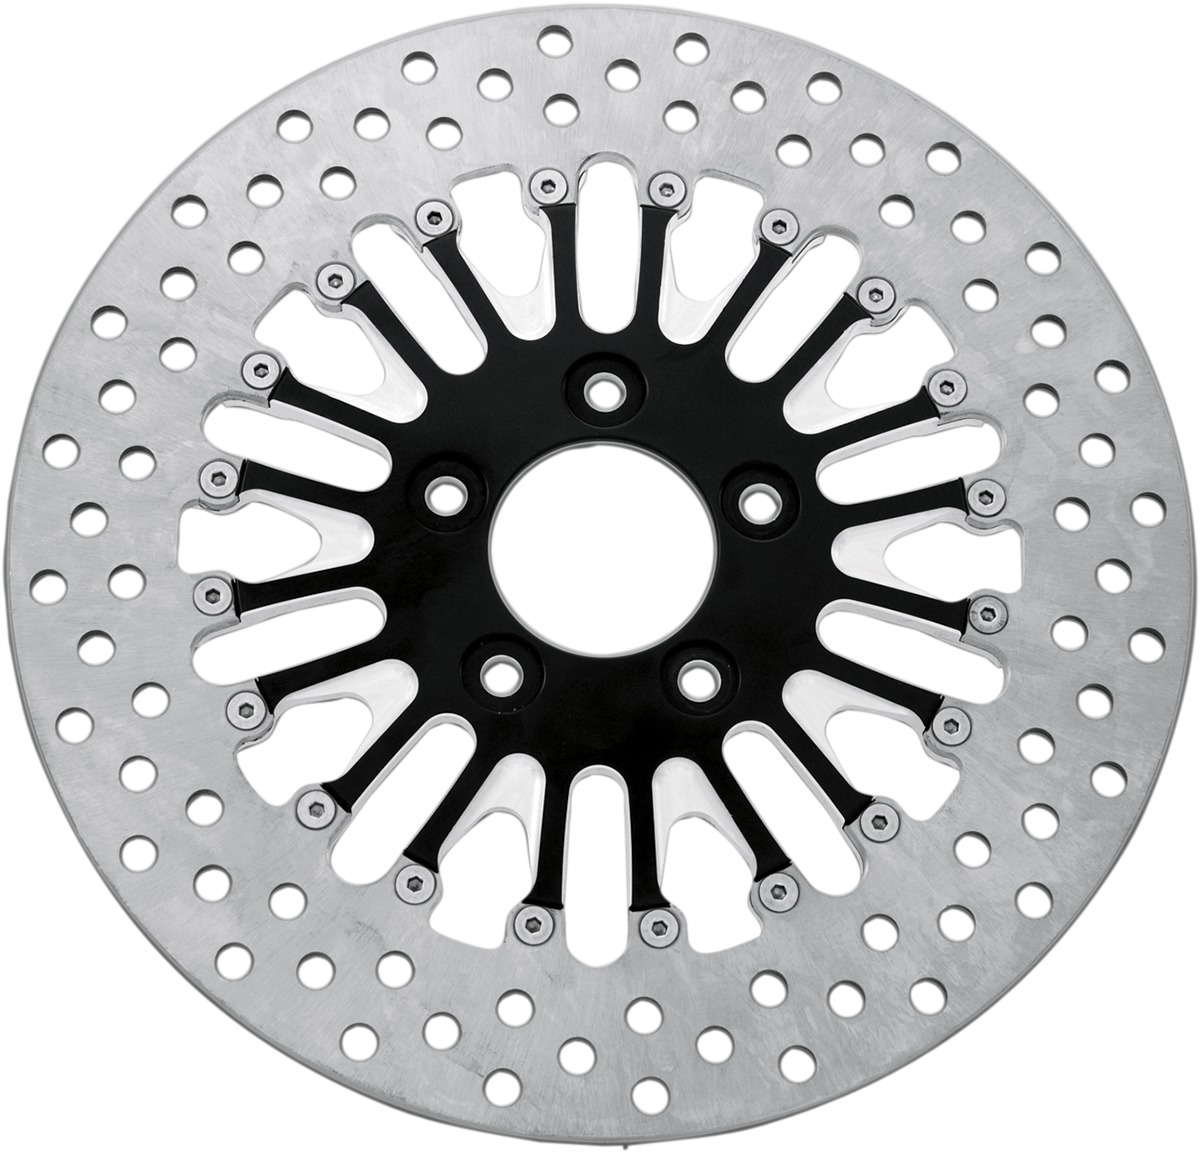 Boss Floating Front Left Brake Rotor 292mm Contrast Cut - Harley - Click Image to Close